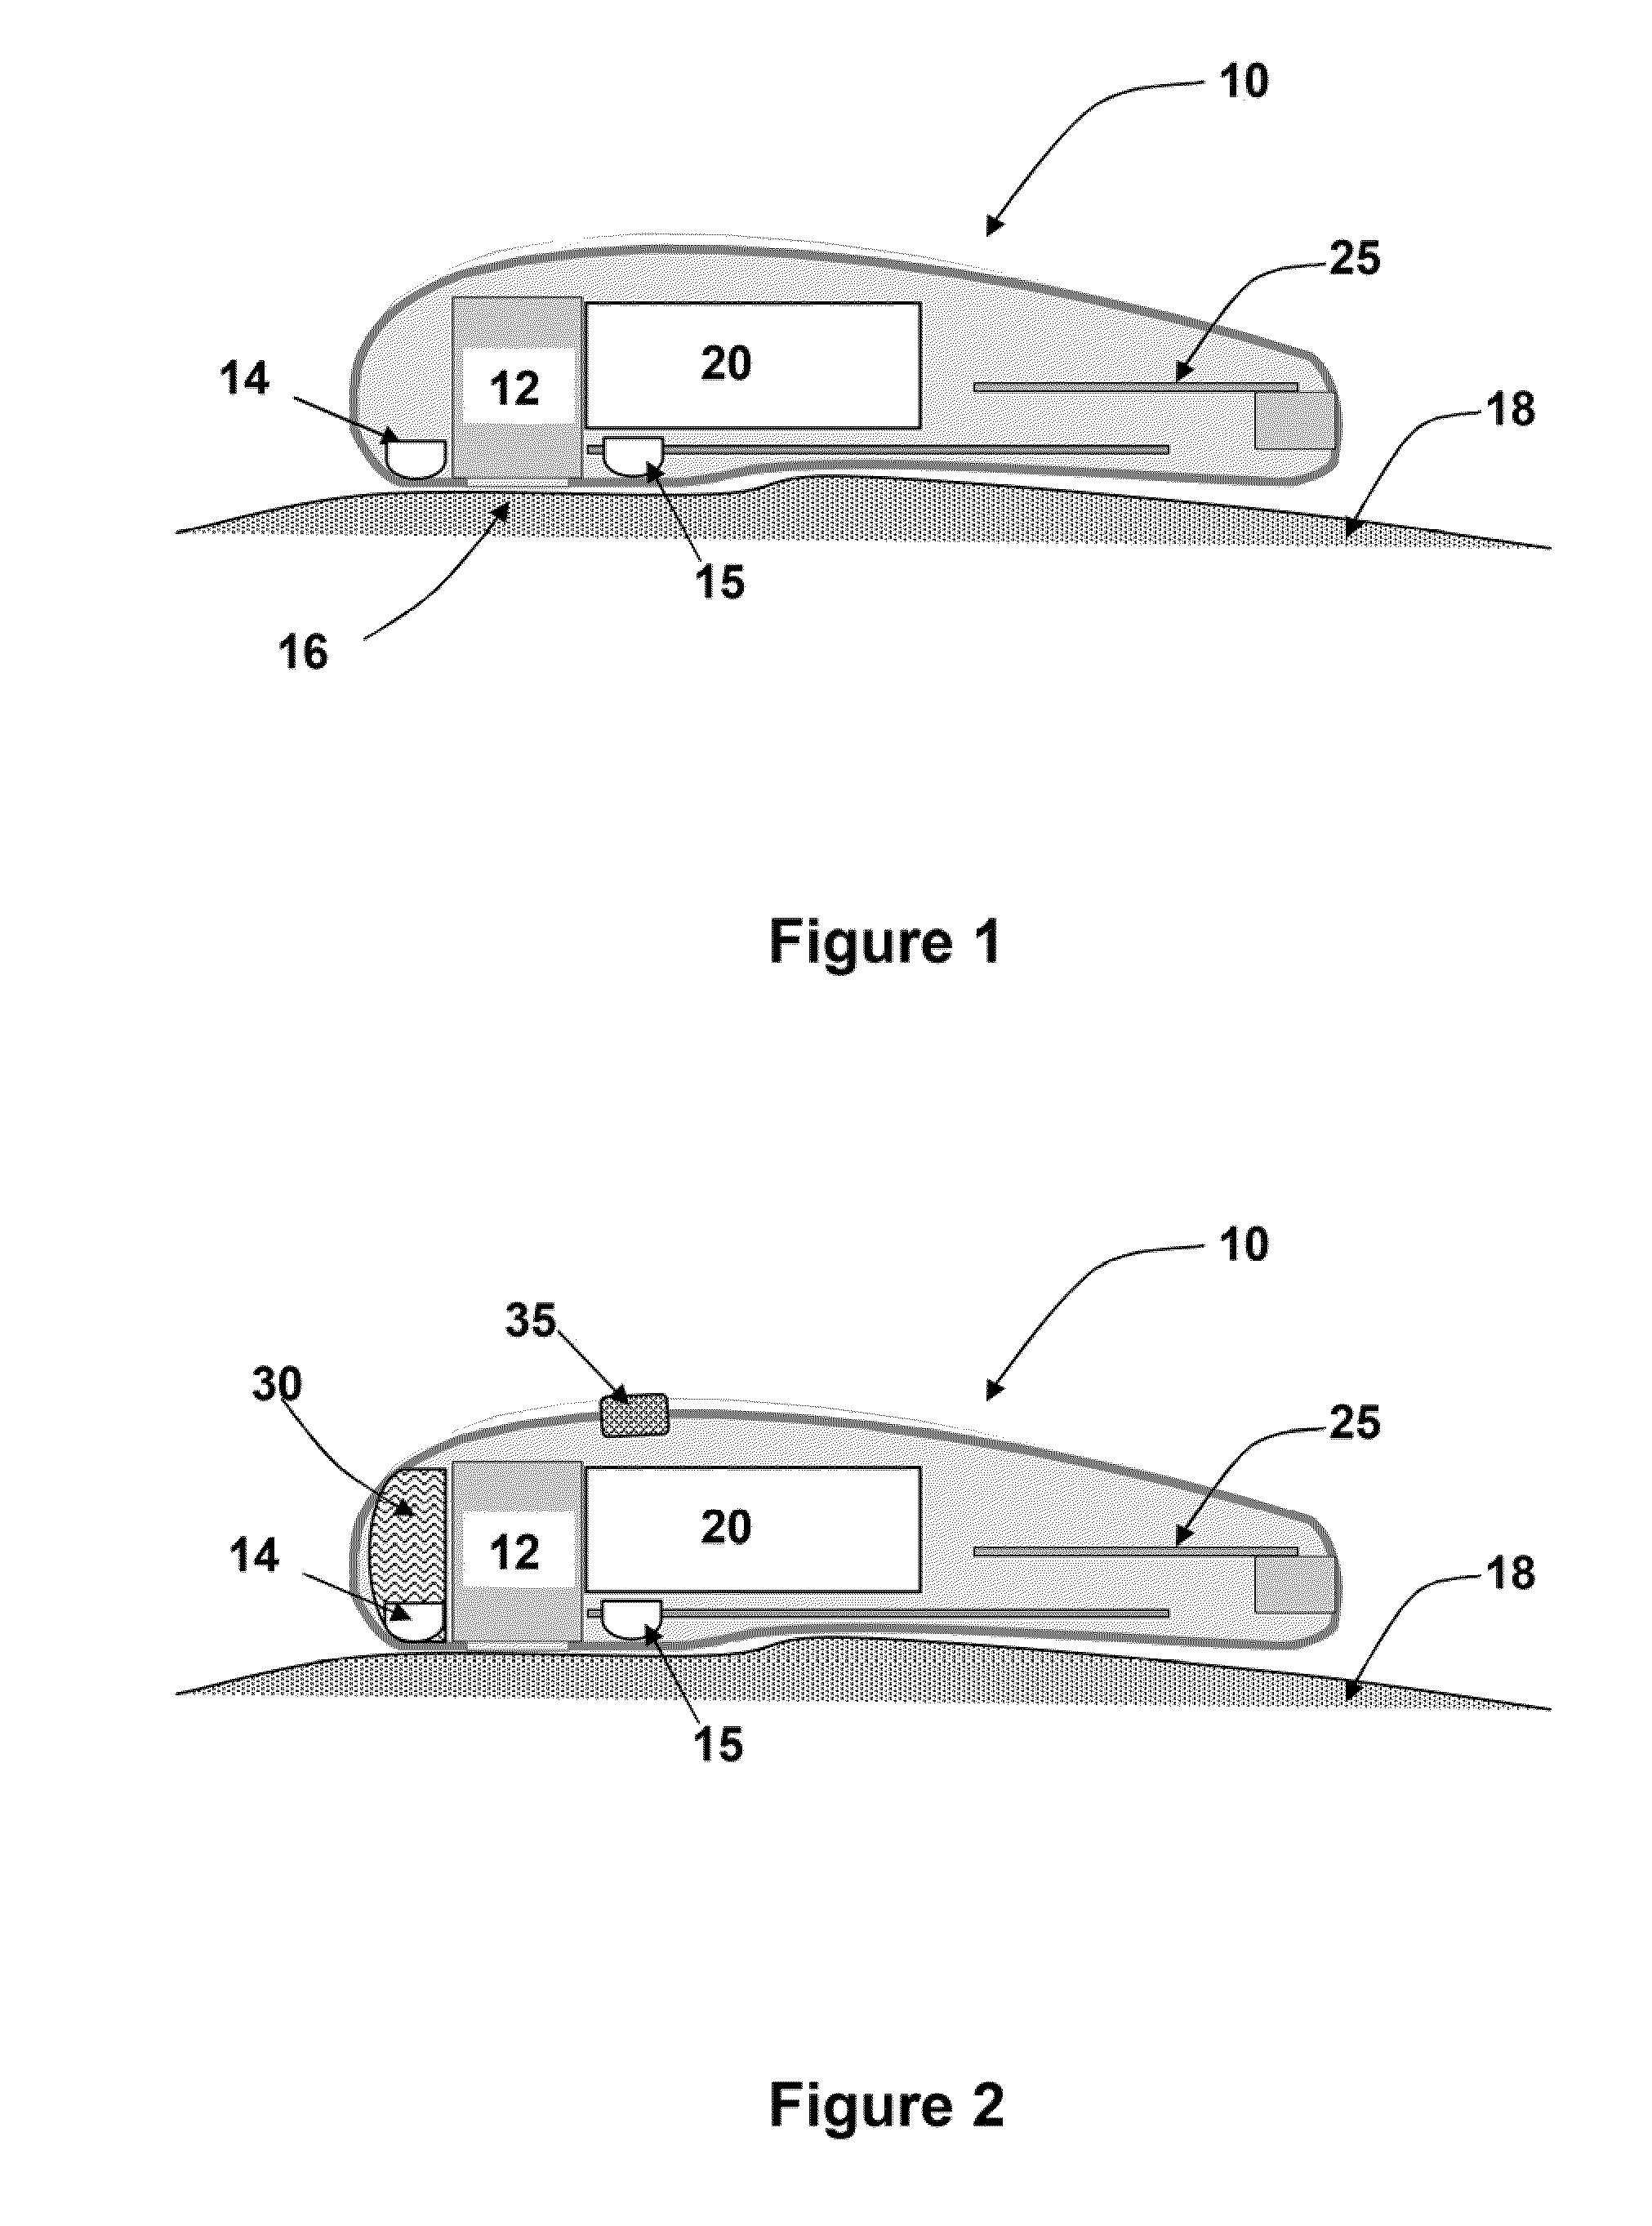 Tissue thickness and structure measurement device